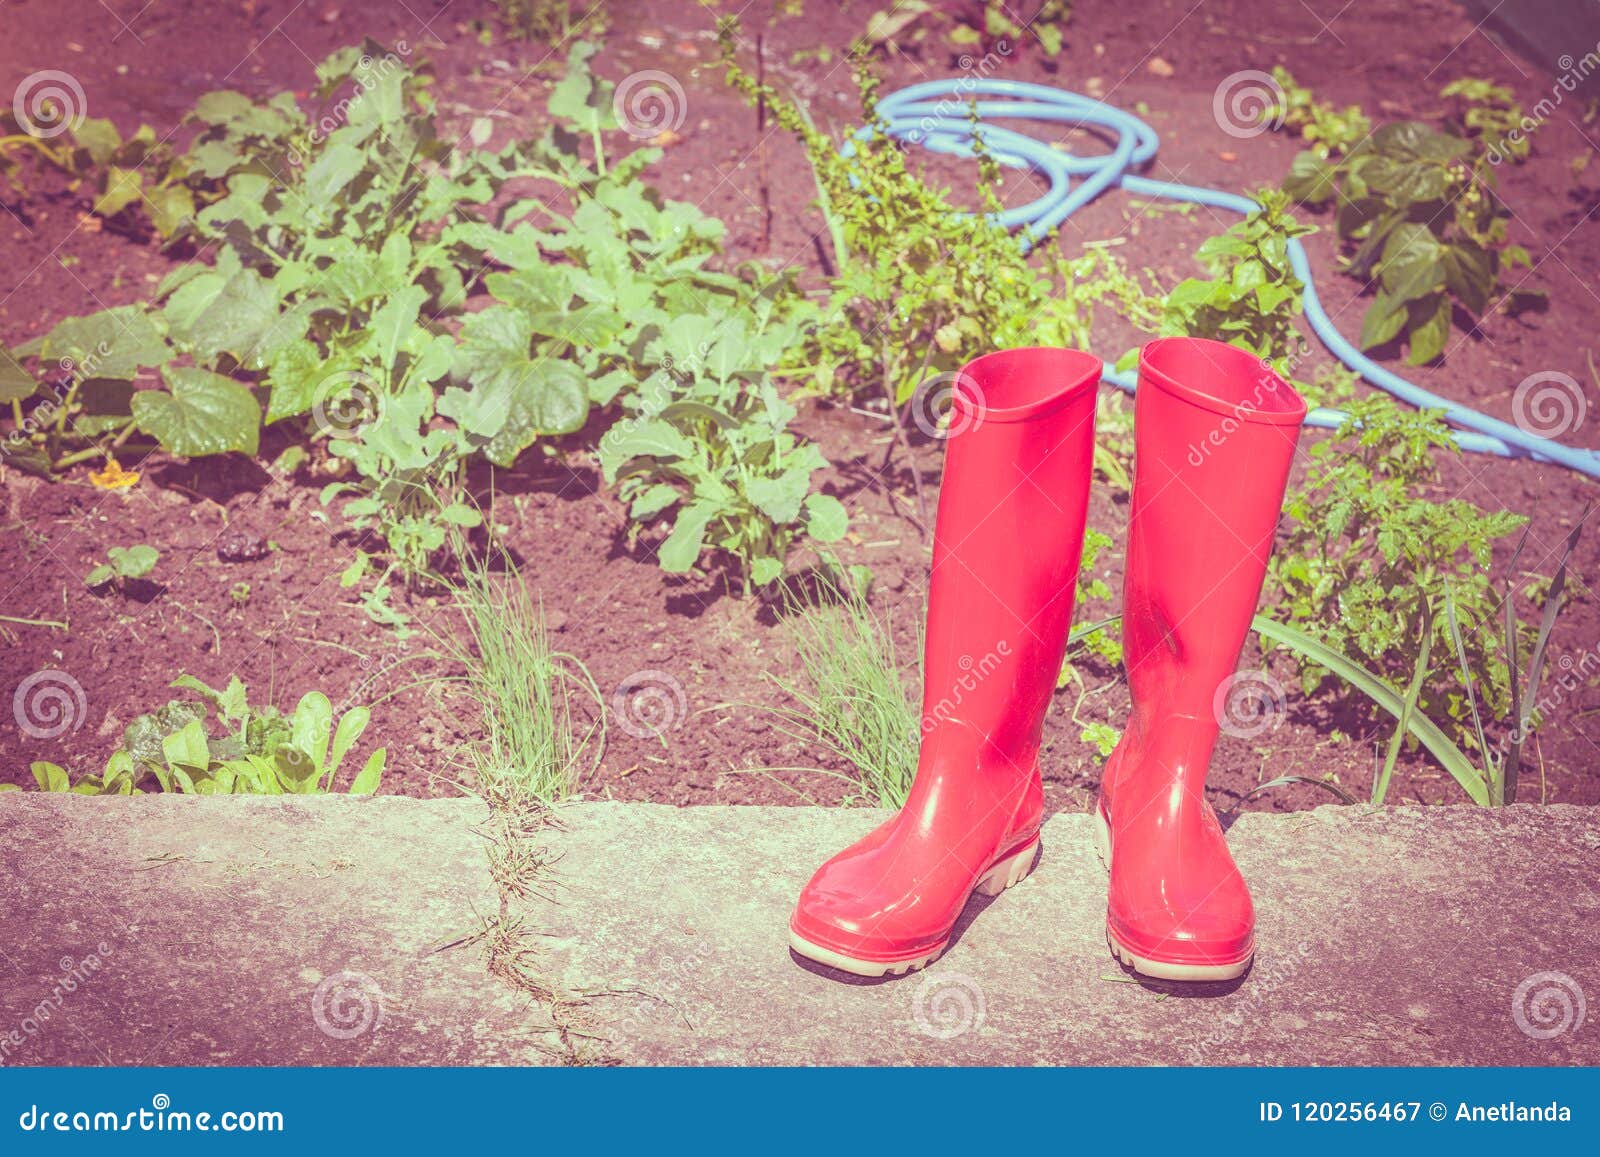 Red rubber boots in garden stock image. Image of work - 120256467